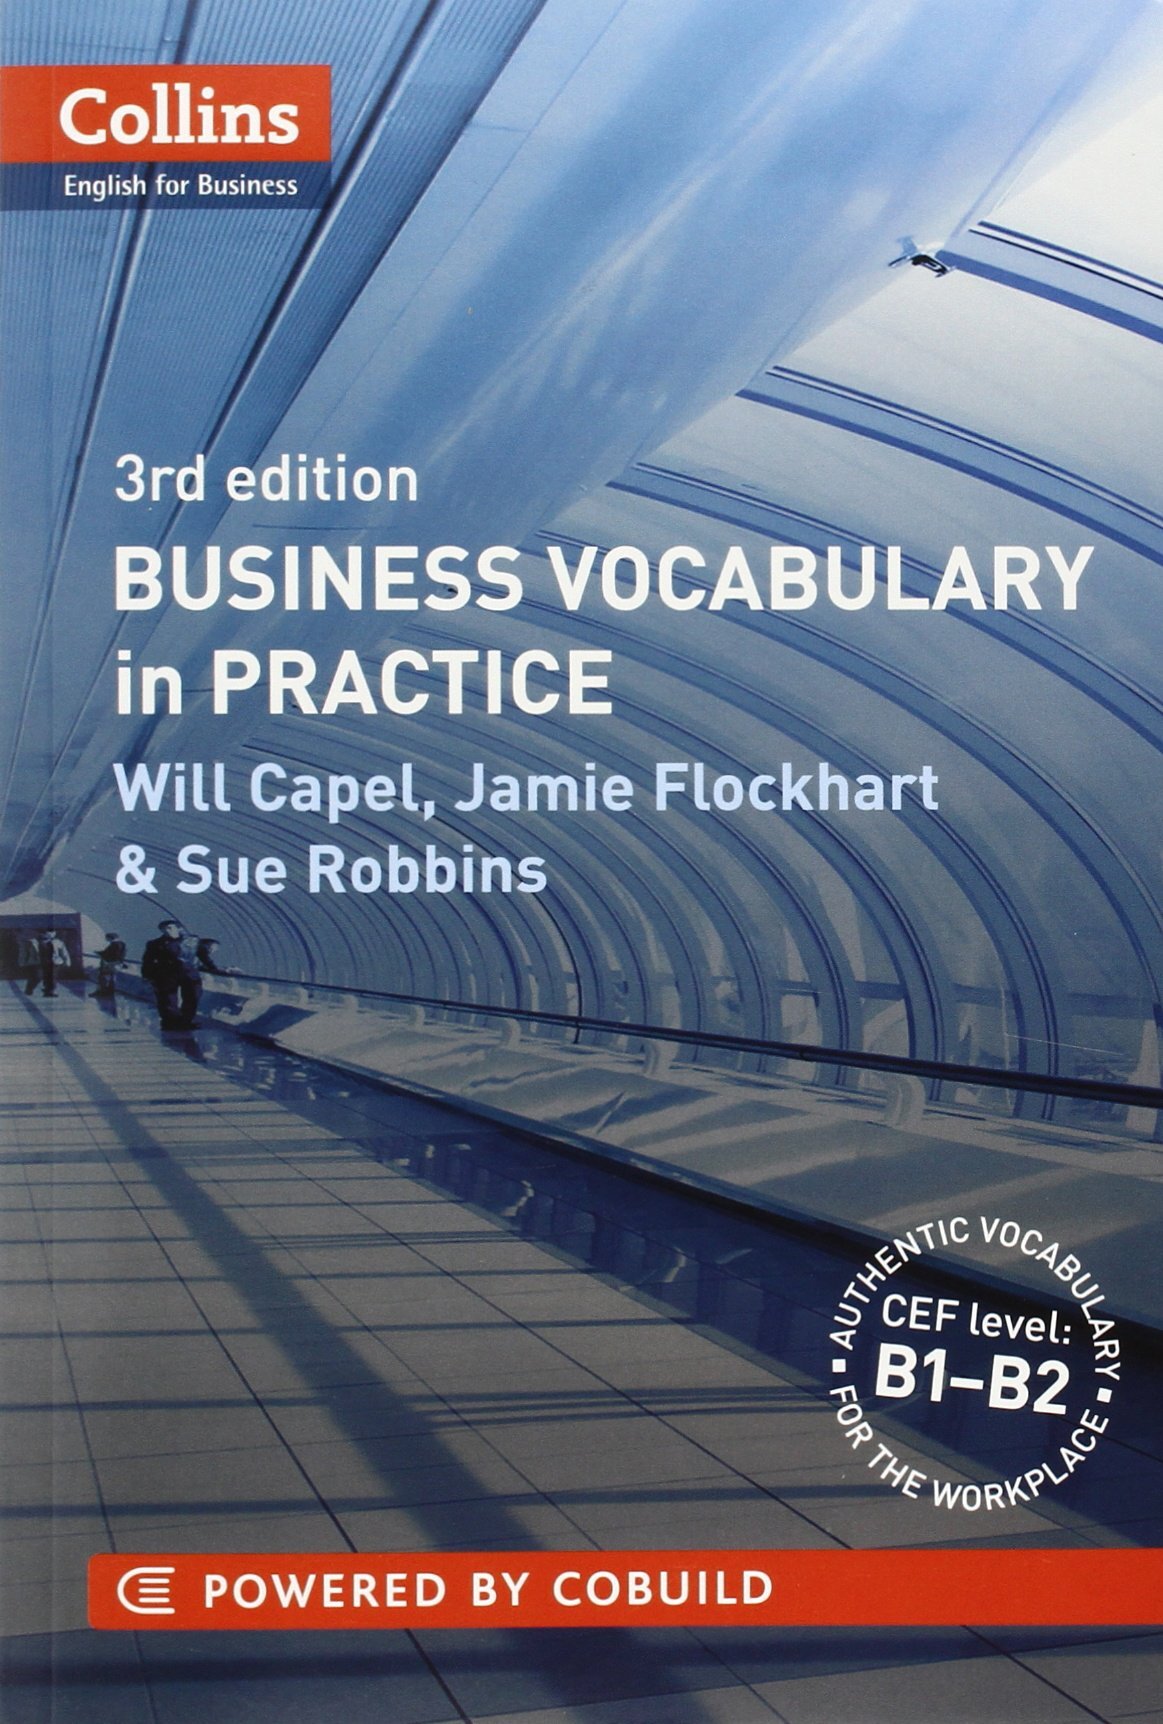 Collins - English For Business - Business Vocabulary in Practice